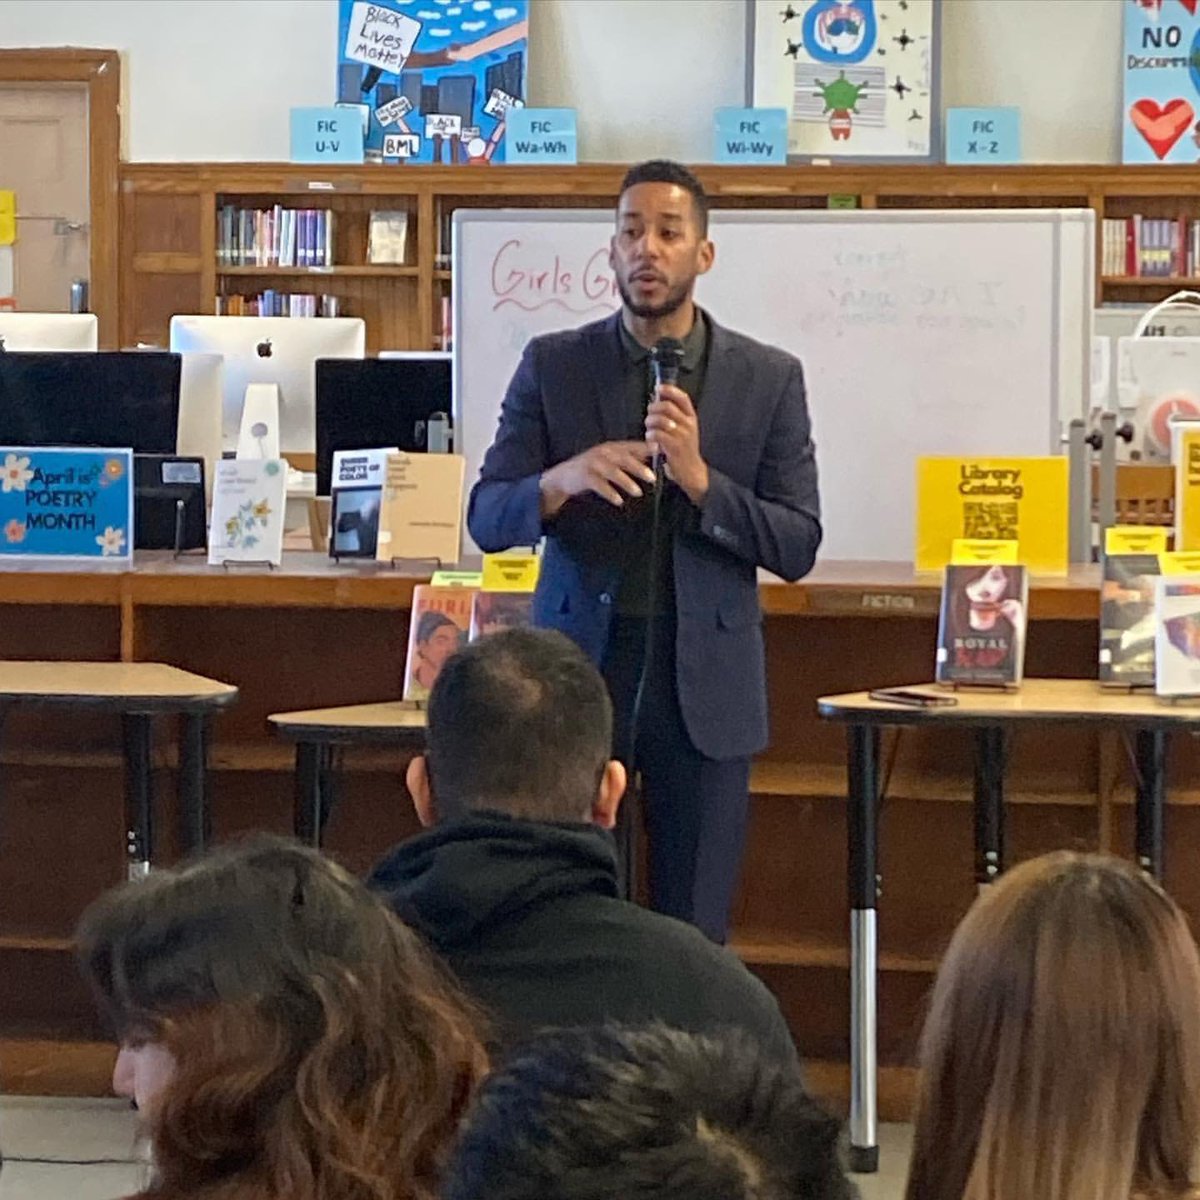 Big thanks to @BKBPReynoso for sharing invaluable insights with our seniors at Leaders High School! Your wisdom on driving positive change in our communities is truly inspiring. 🌟 #LeadersHighSchool #CommunityChange